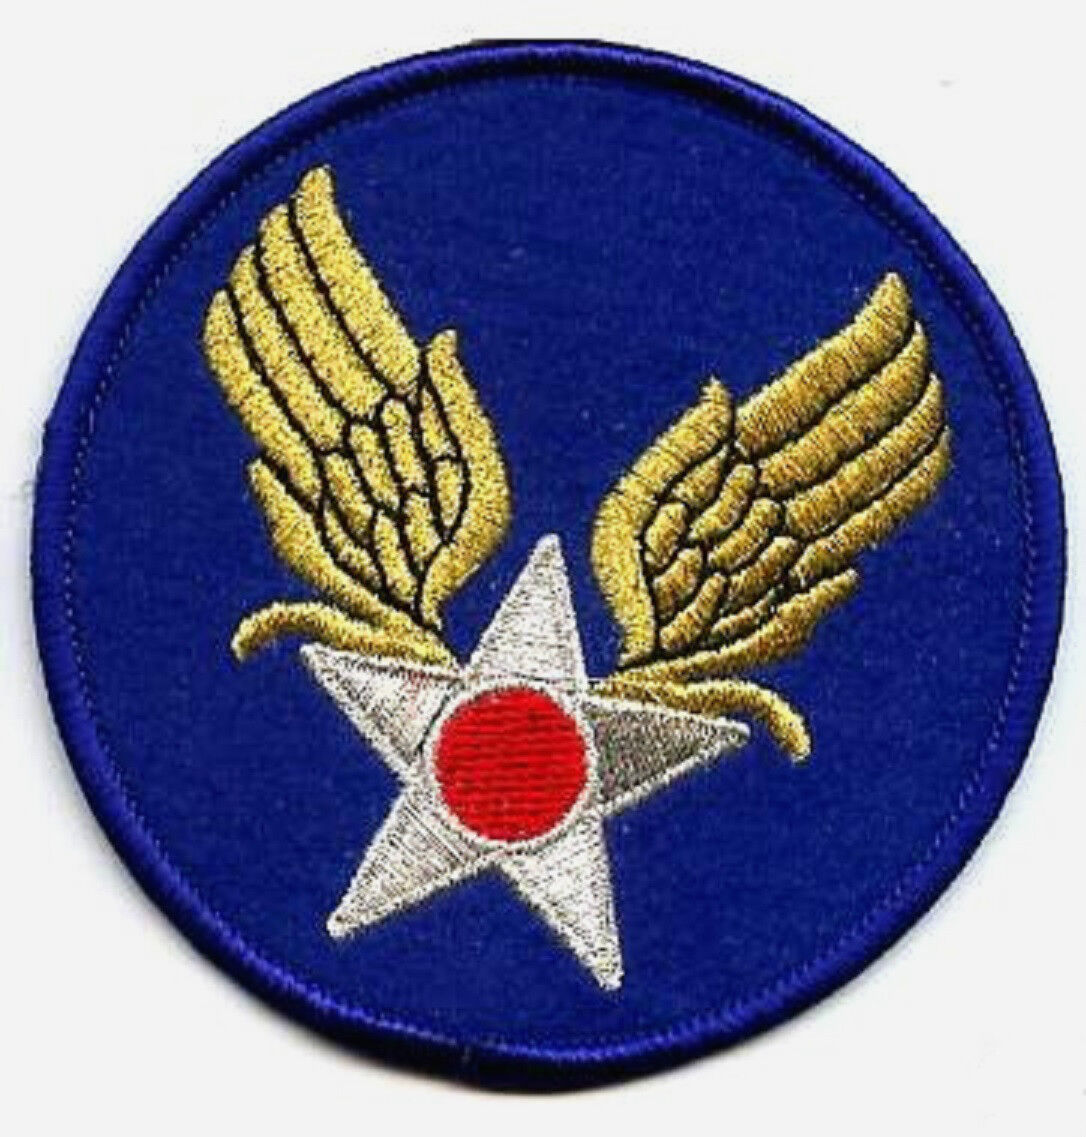 WWII US ARMY AIR FORCE INSIGNIA COLLECTIONS: AAF WWII VANTAGE INSIGNIA PATCH